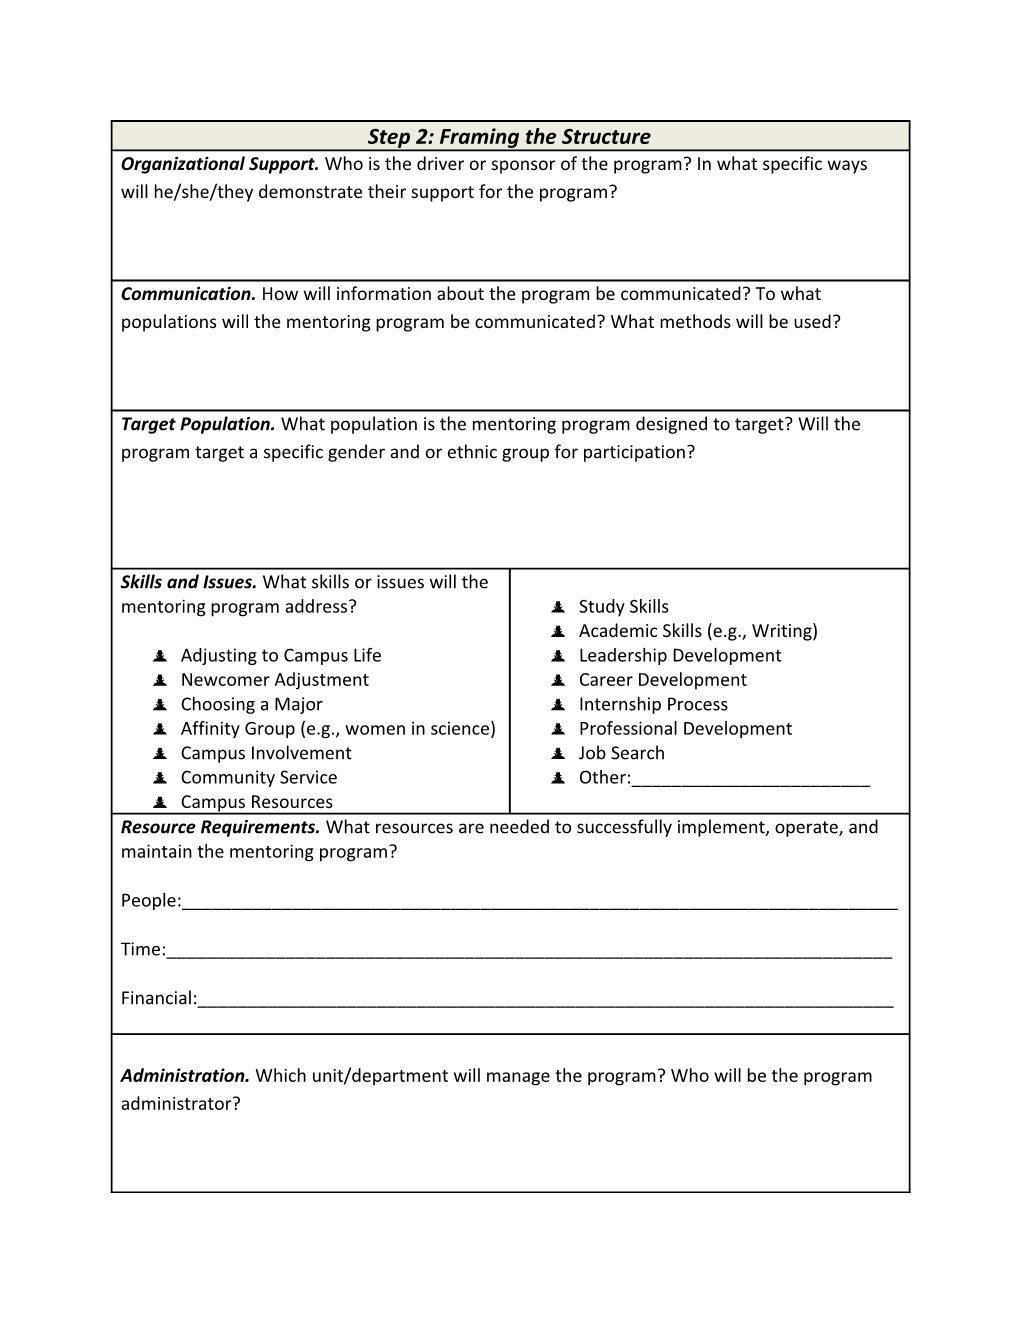 Scope and Planning Form for a Formal Mentoring Program